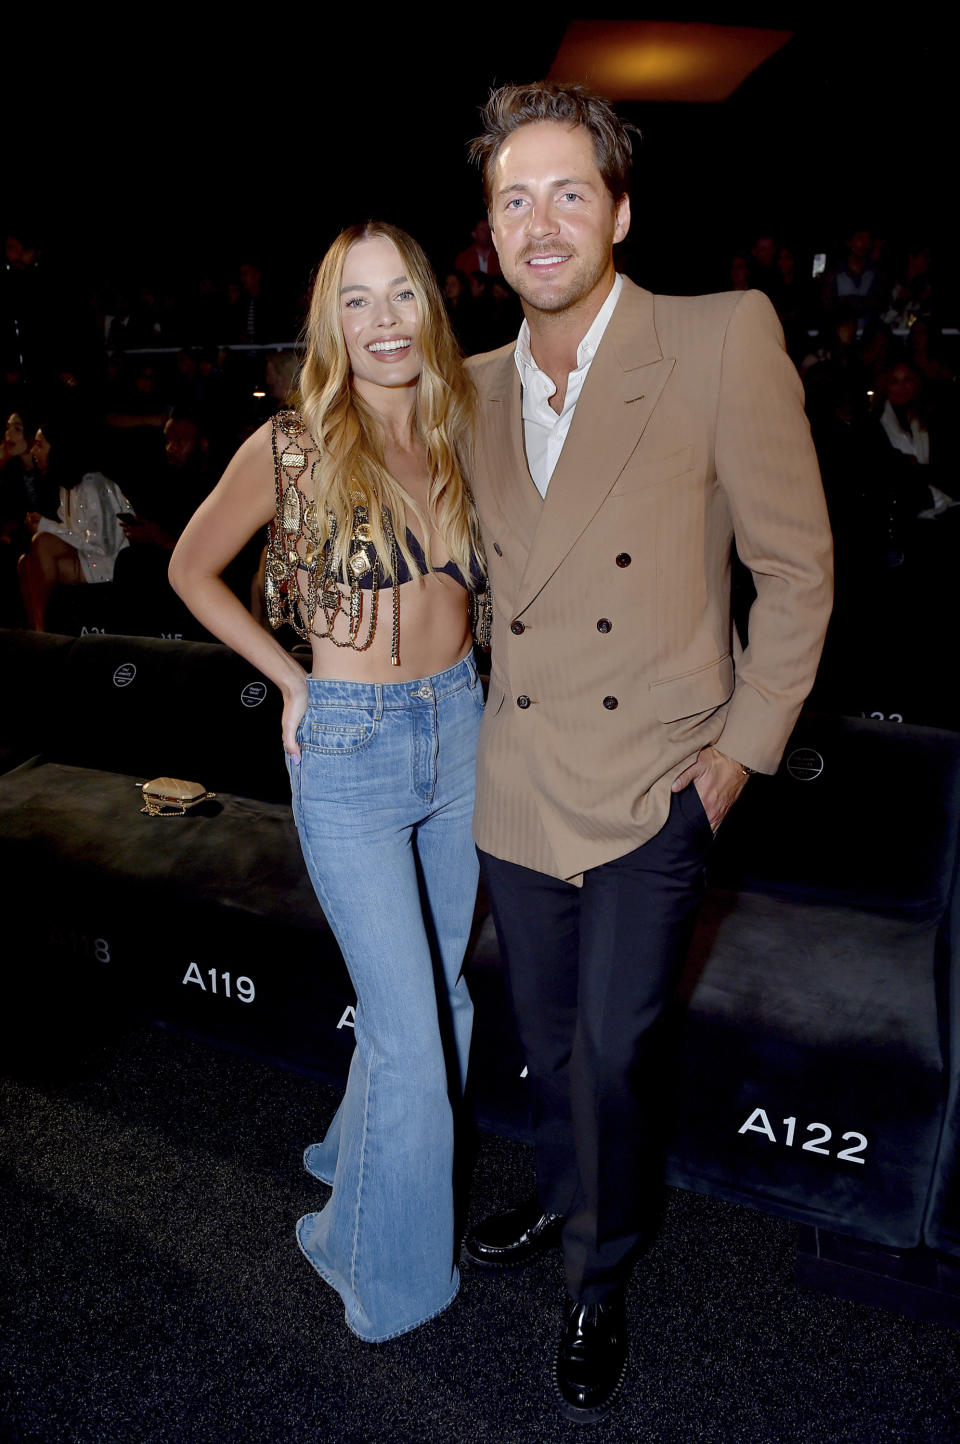 Margot Robbie, left, and Tom Ackerley attend the Chanel Cruise 2023/2024 Fashion Show on Tuesday, May 9, 2023, at Paramount Studios in Los Angeles. (Photo by Jordan Strauss/Invision/AP)